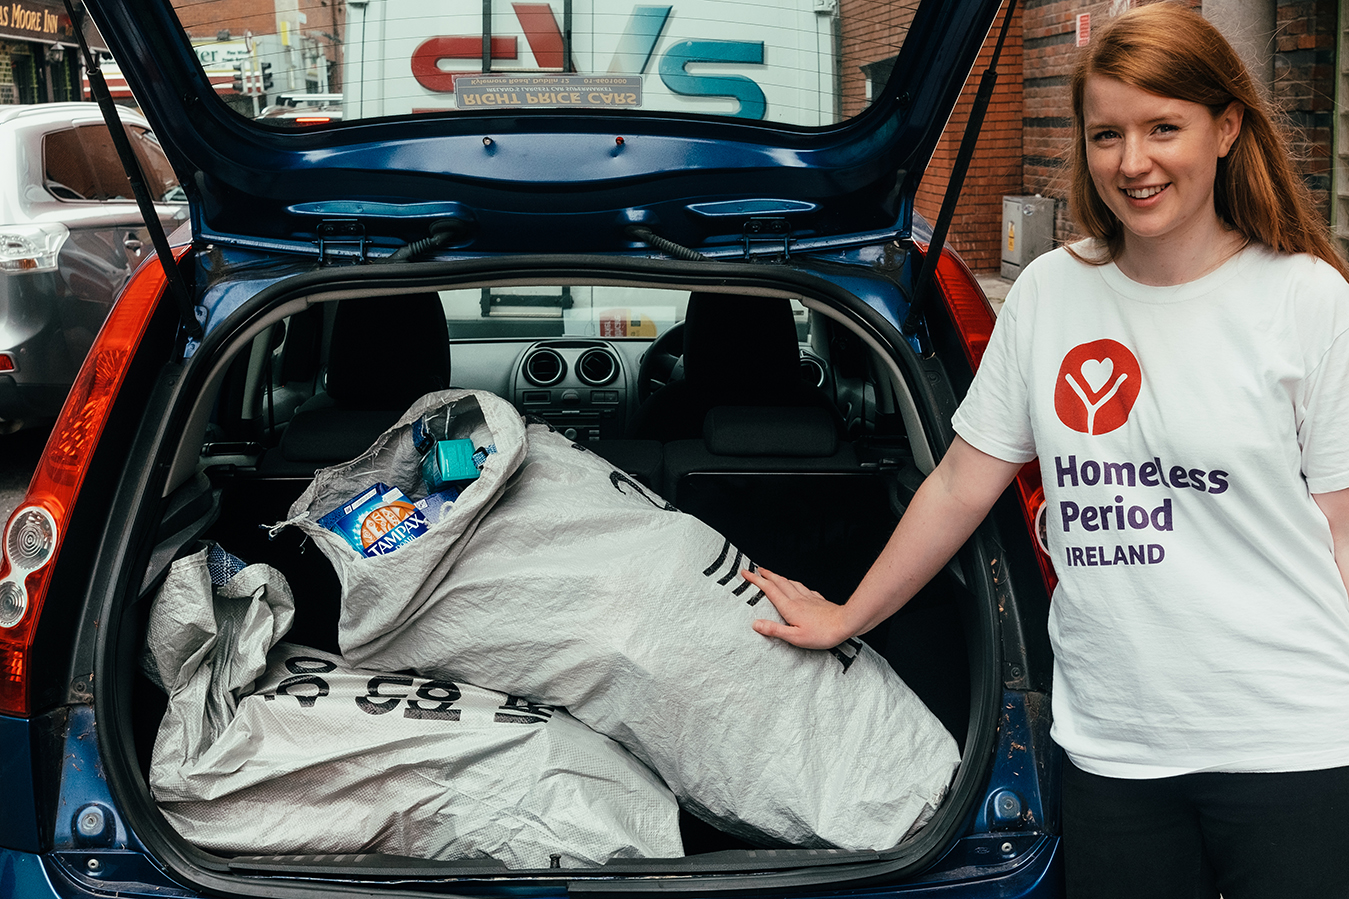 Maírin from homeless Period Ireland picks up 2,000 more tampons as part of Ciara Kelly’s ‘Stop the Shame’ protest